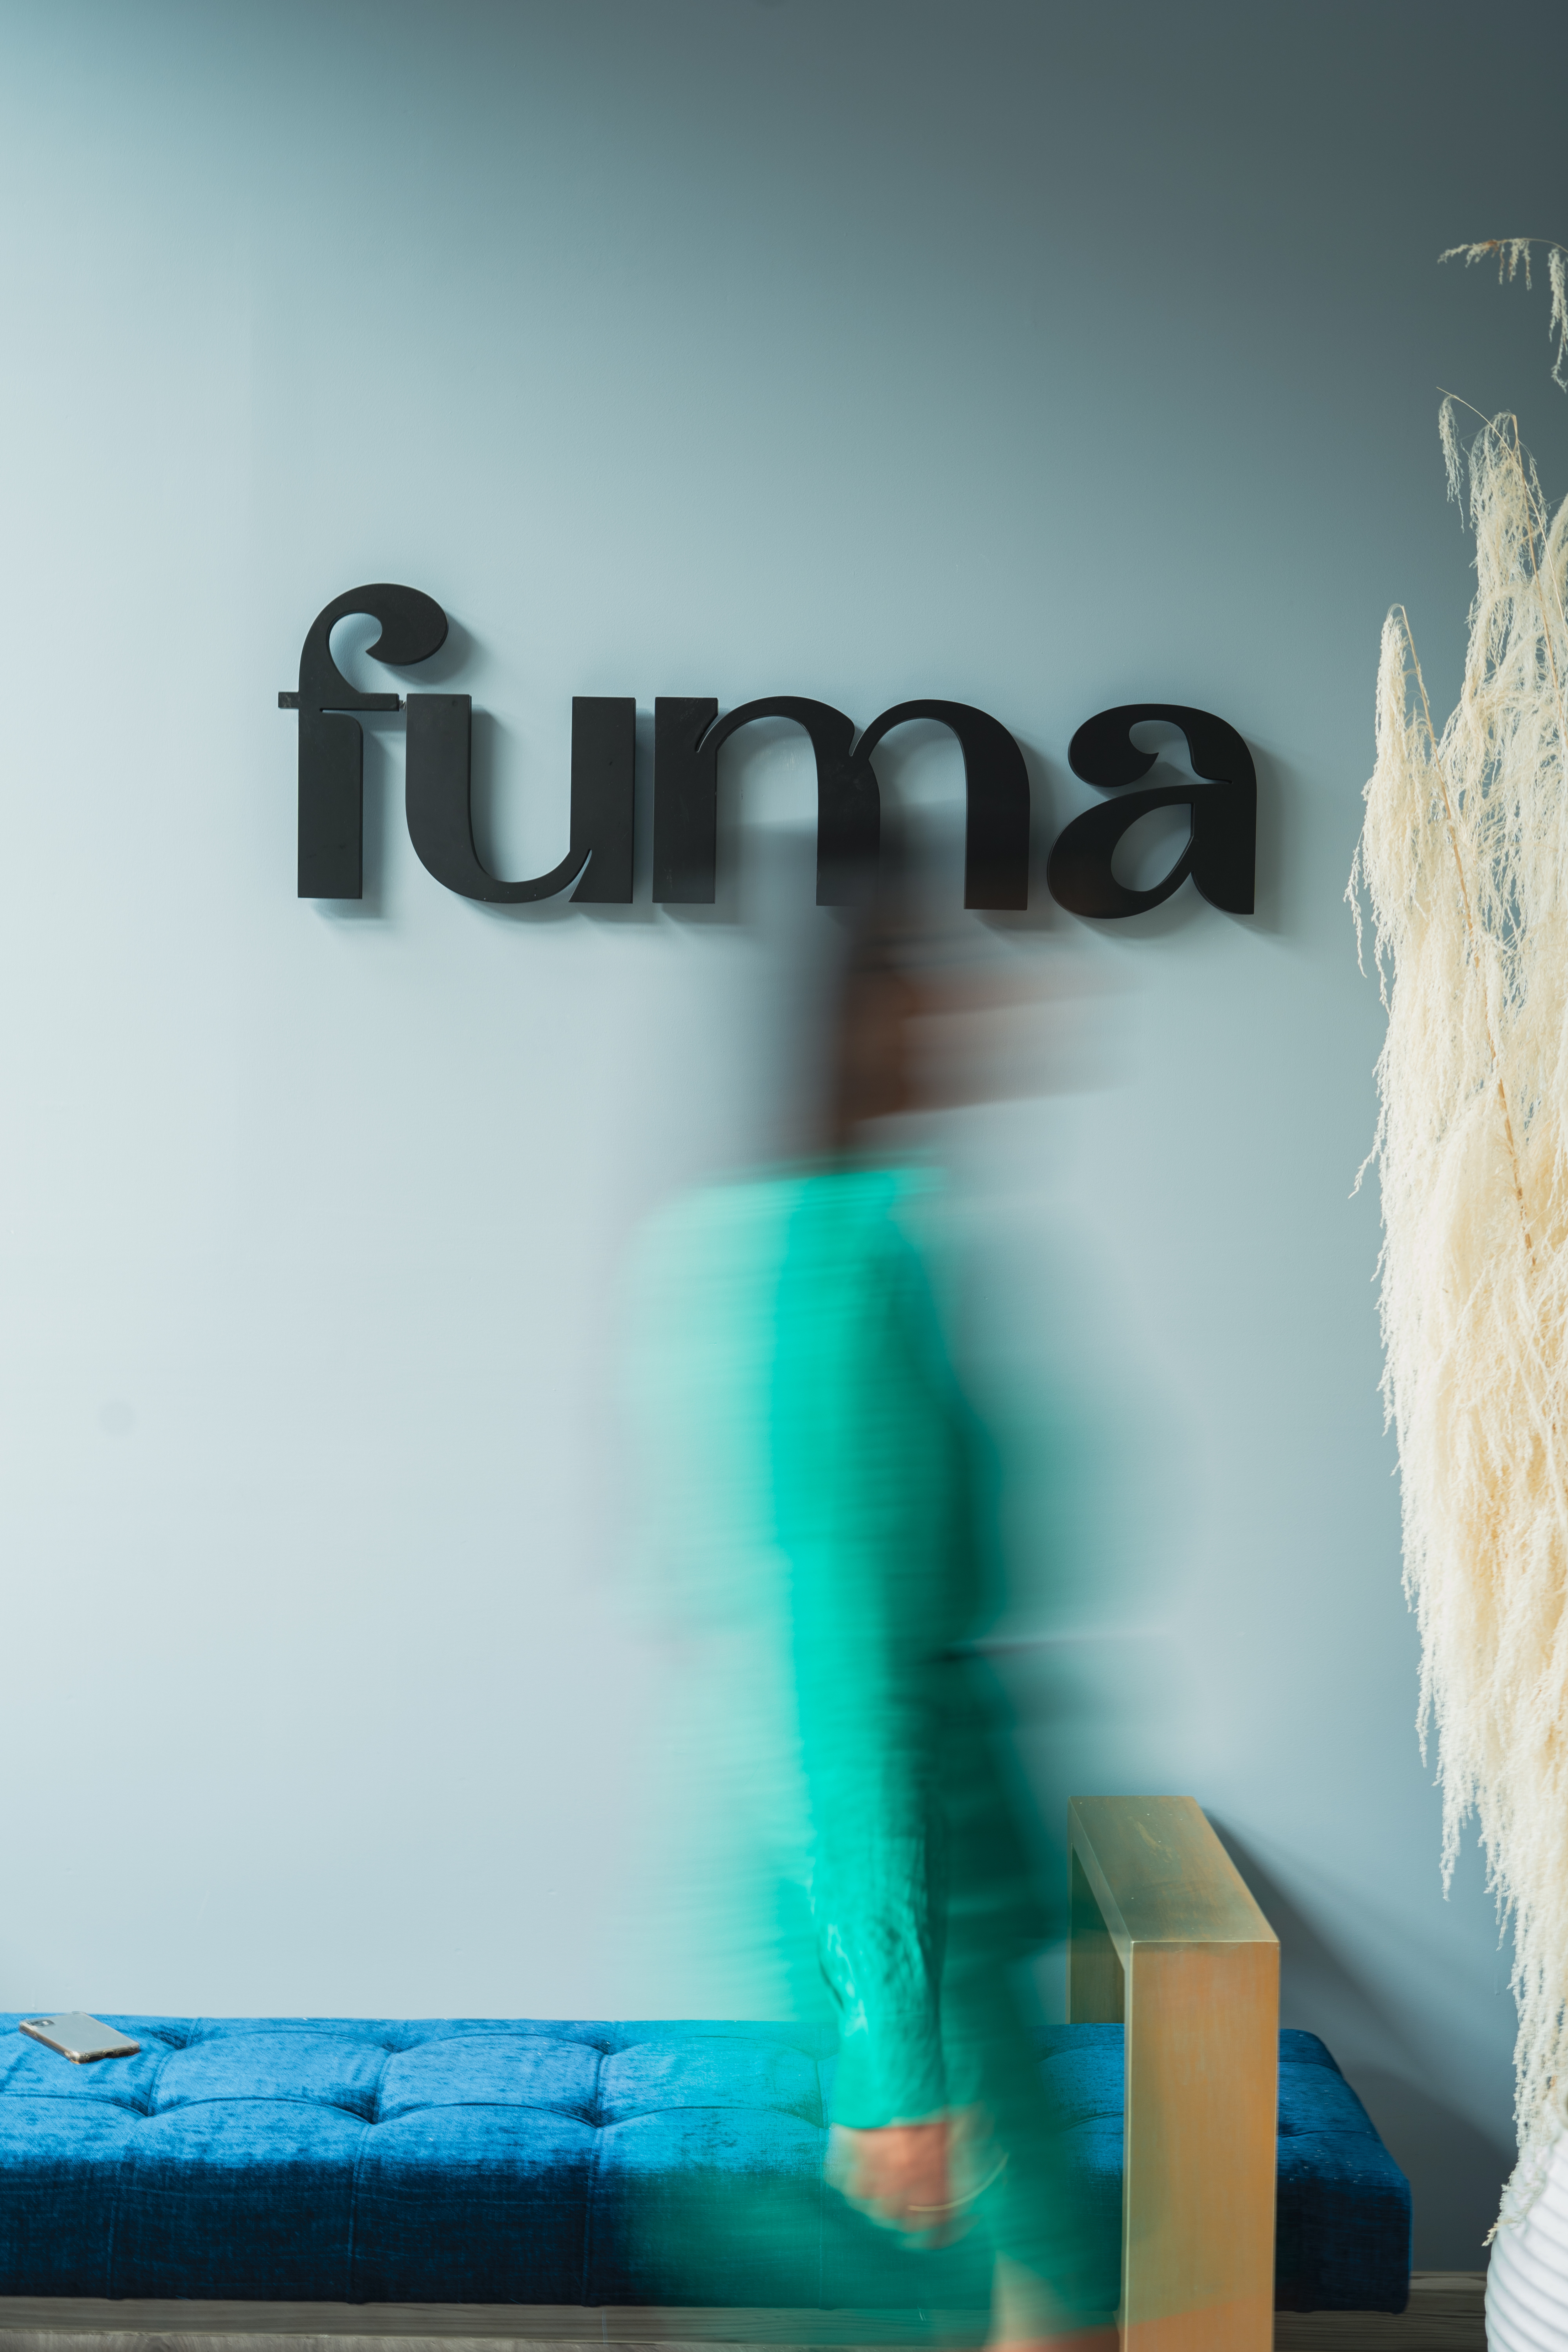 Fuma restaurant entry with sign